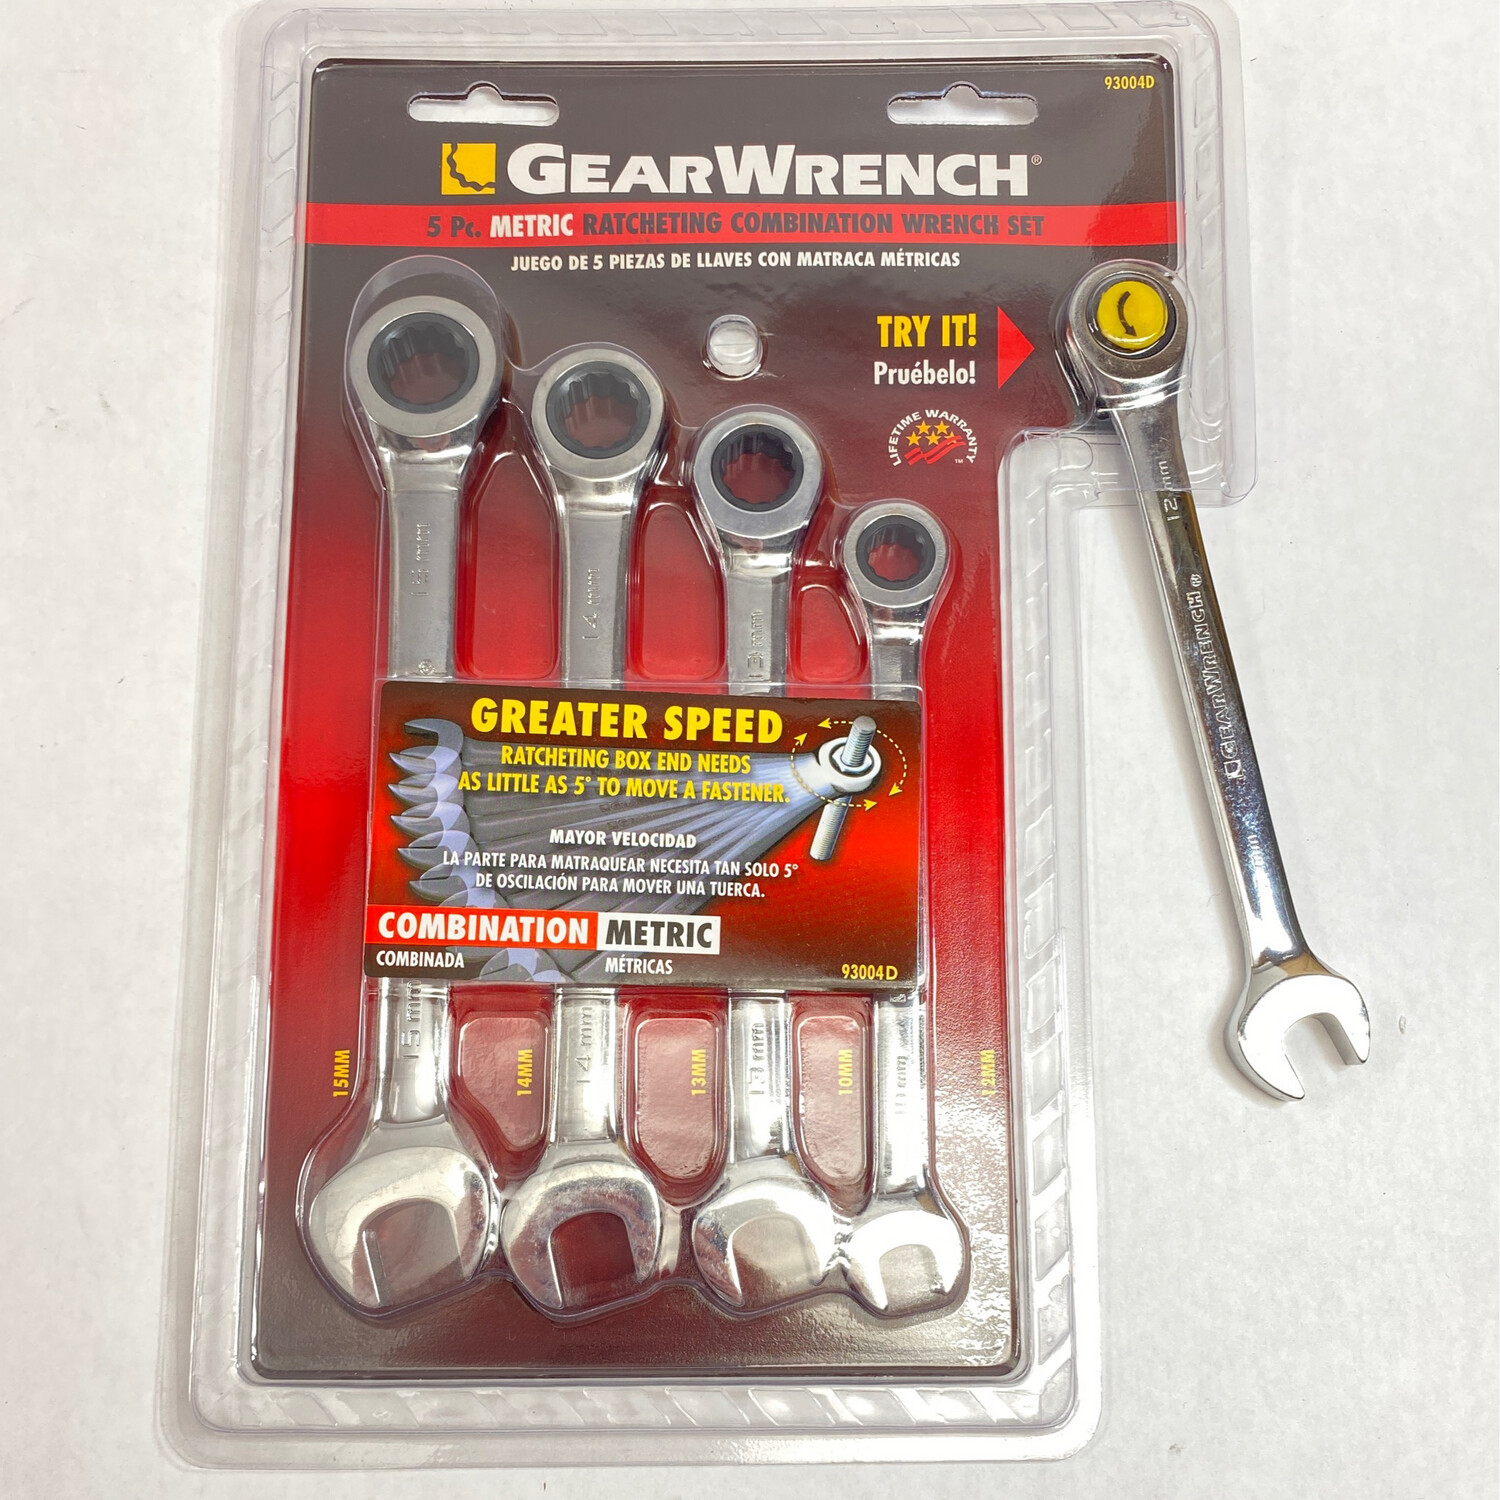 Gearwrench 5 Pc Metric Ratcheting Combination Wrench Set, 93004D